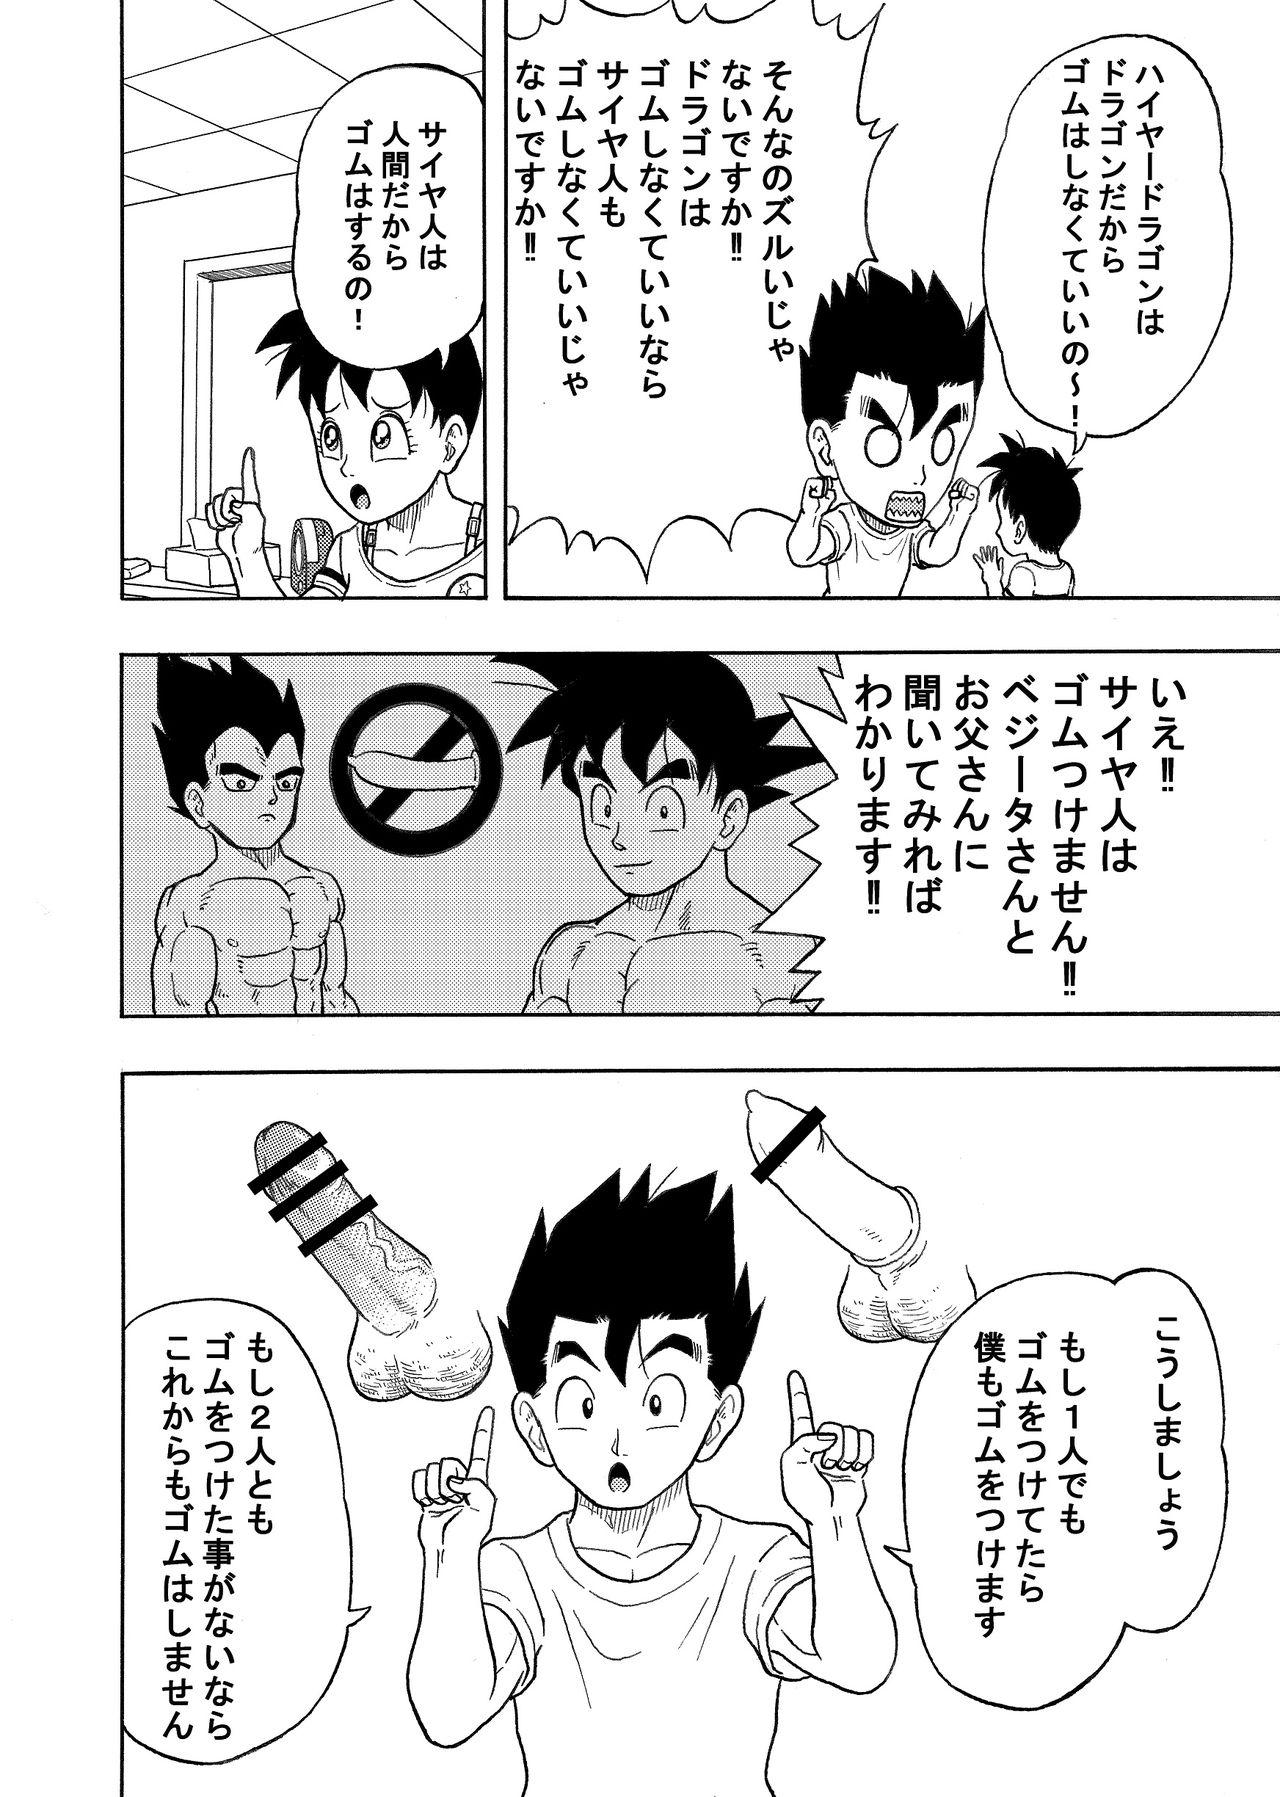 Hardcore I can't put on a condom - Dragon ball z Hindi - Page 7